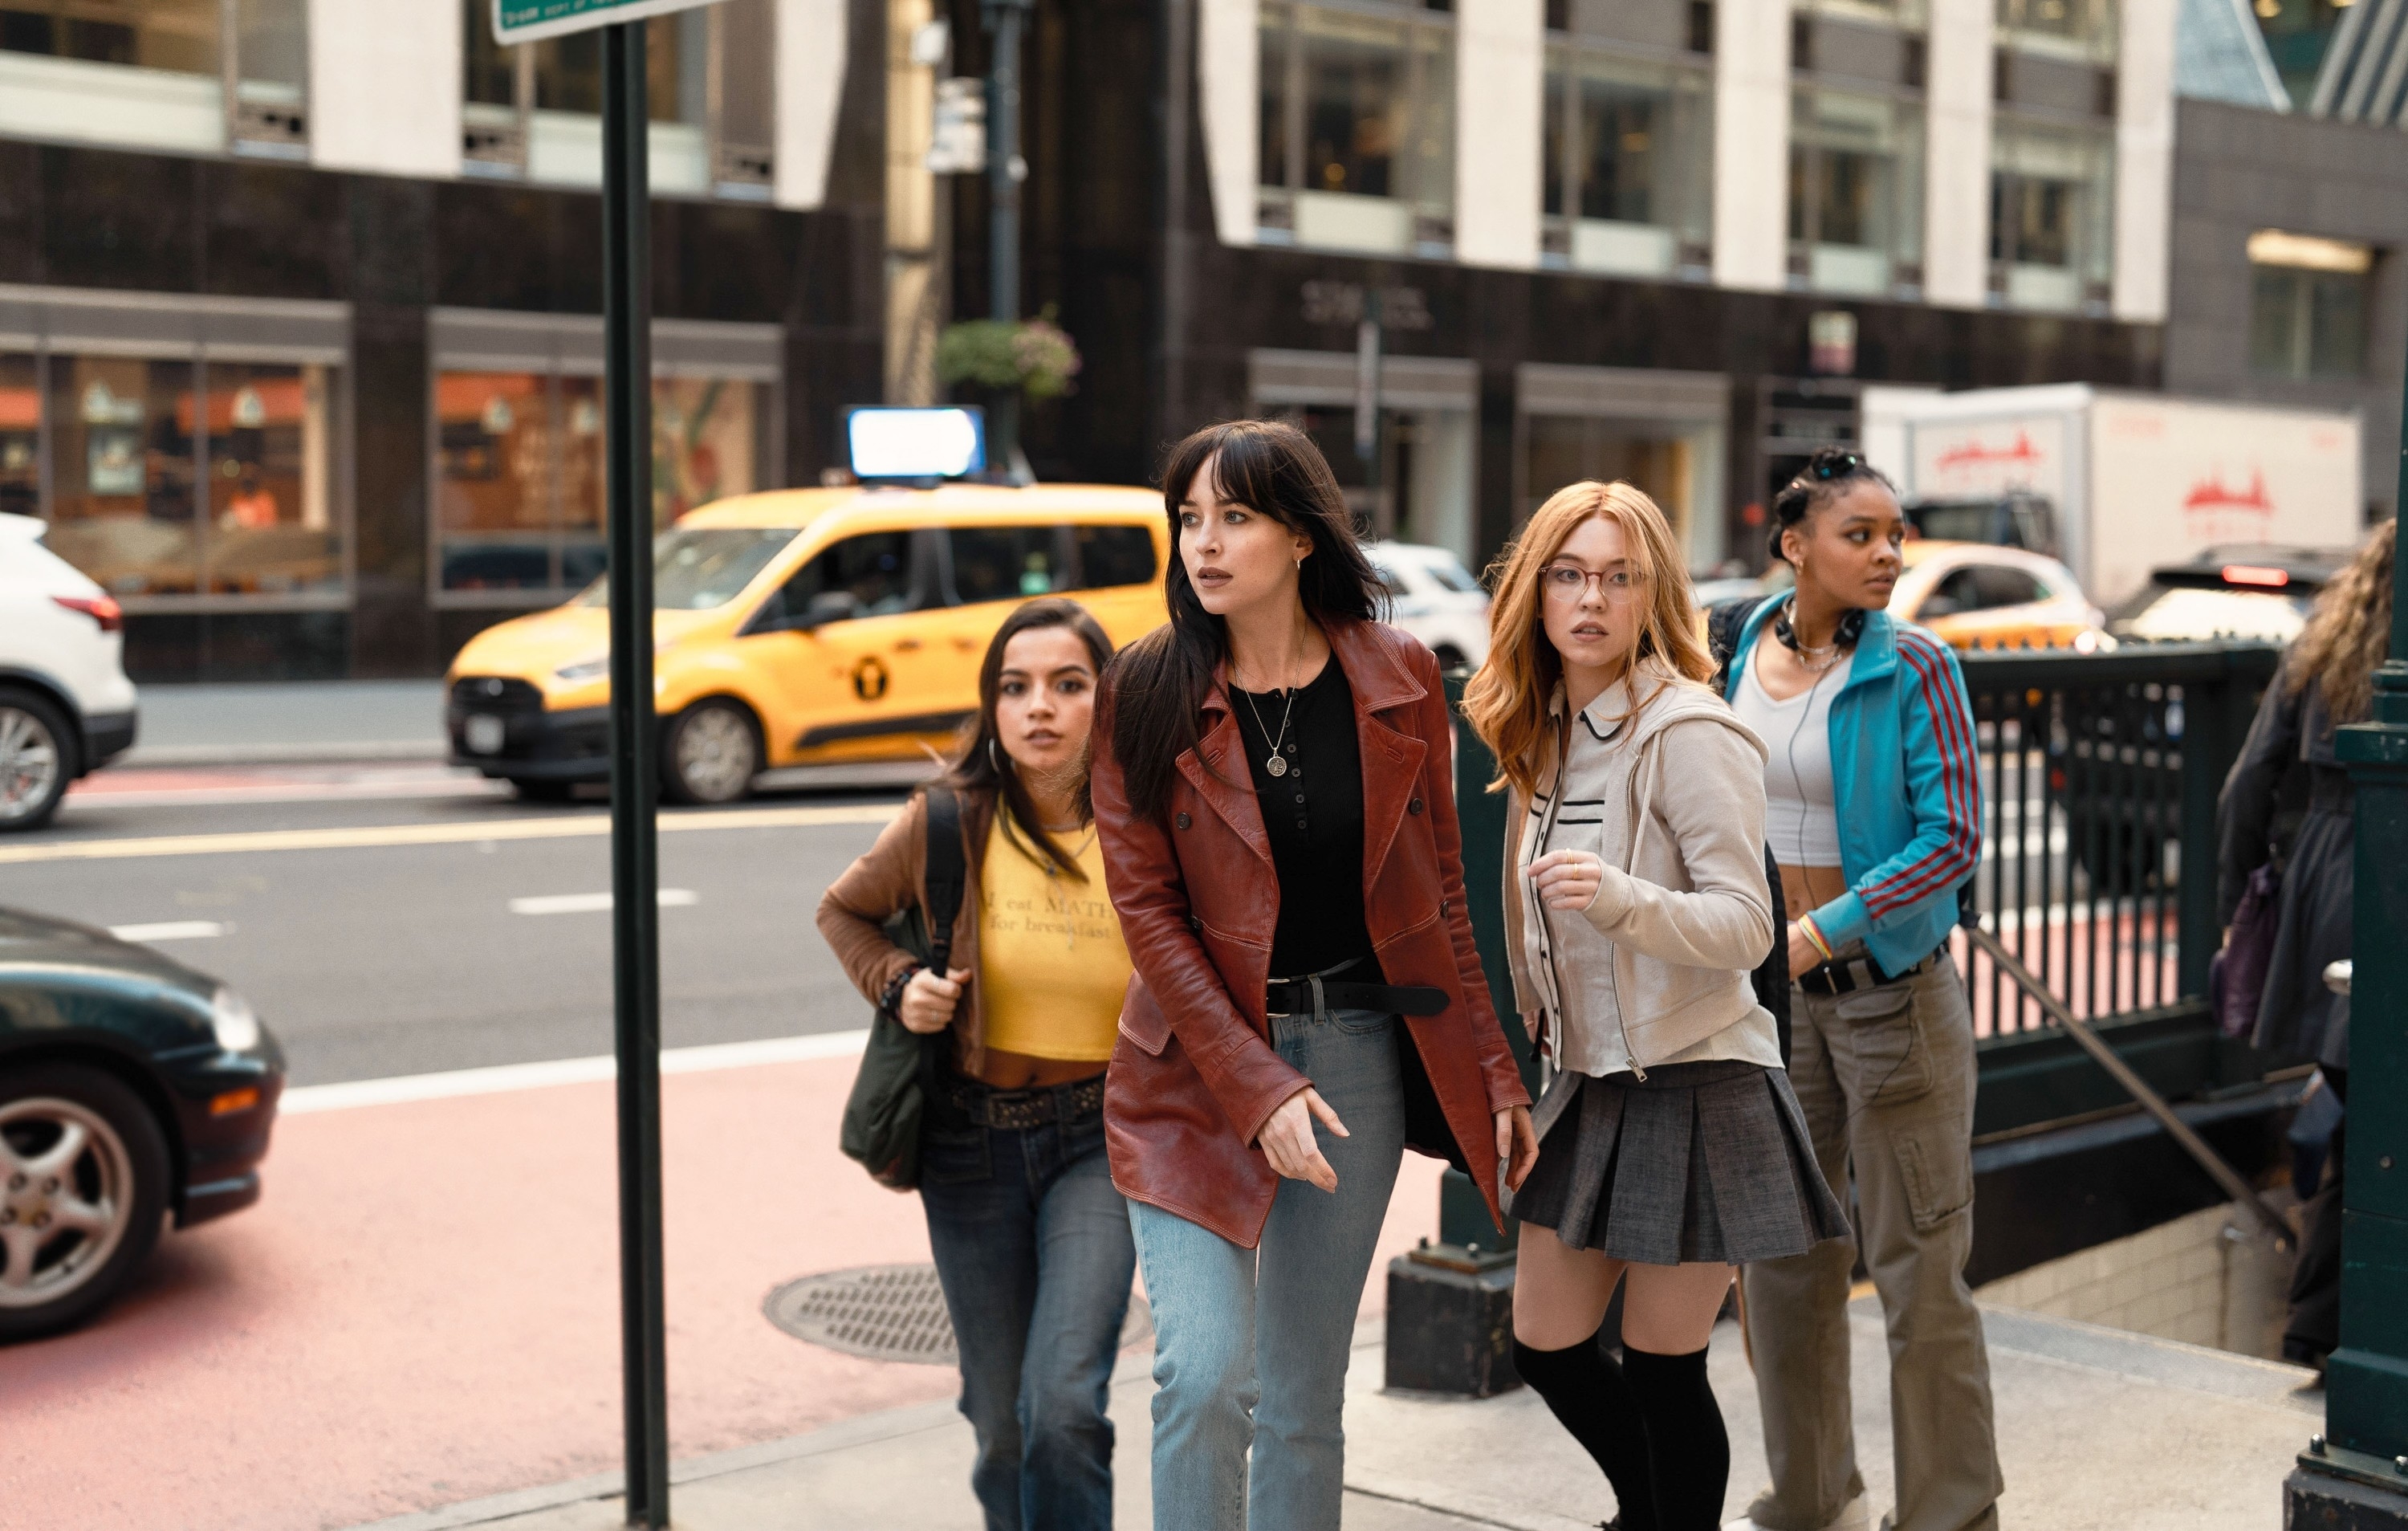 Four women walking on a city street, appearing engaged in conversation, dressed in casual attire in a scene from Madame Web